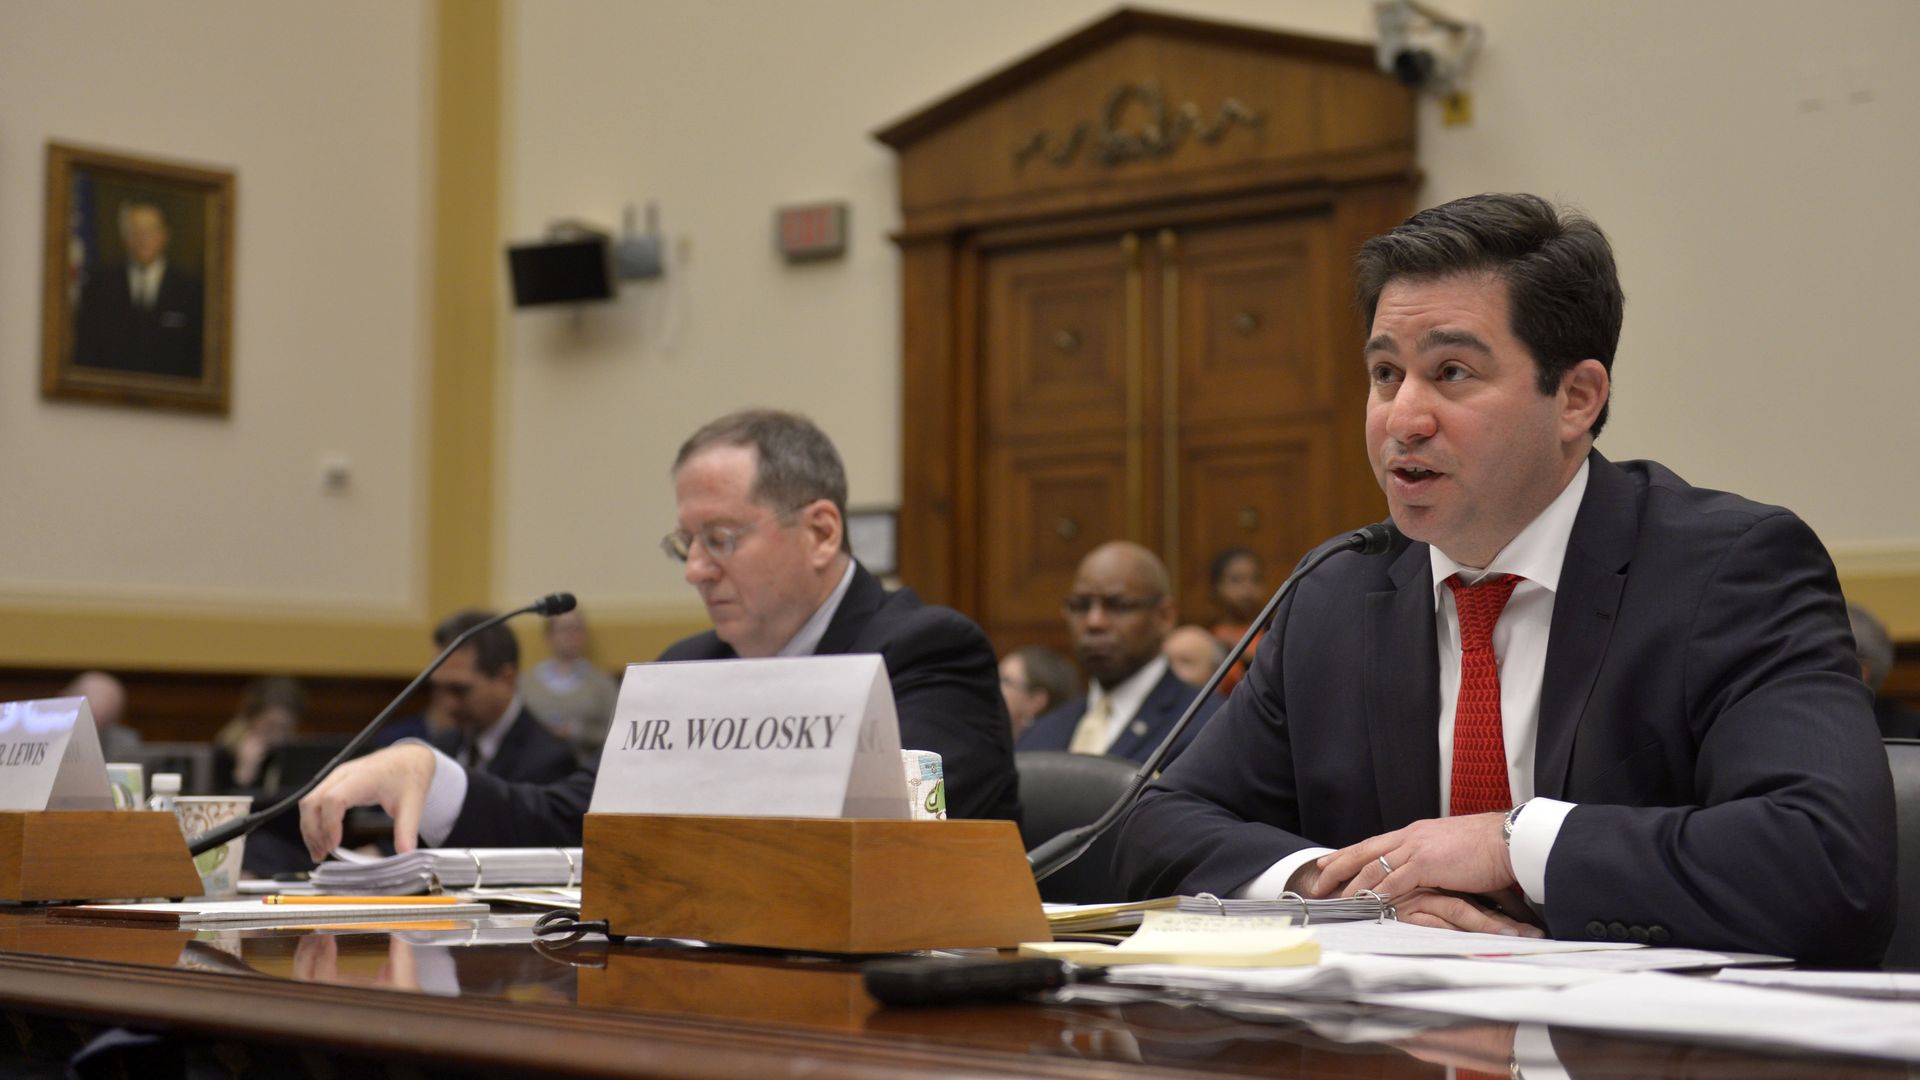 Lee Wolosky, right, testifies before the House Foreign Affairs Committee on Capitol Hill in Washington, D.C., in 2016.